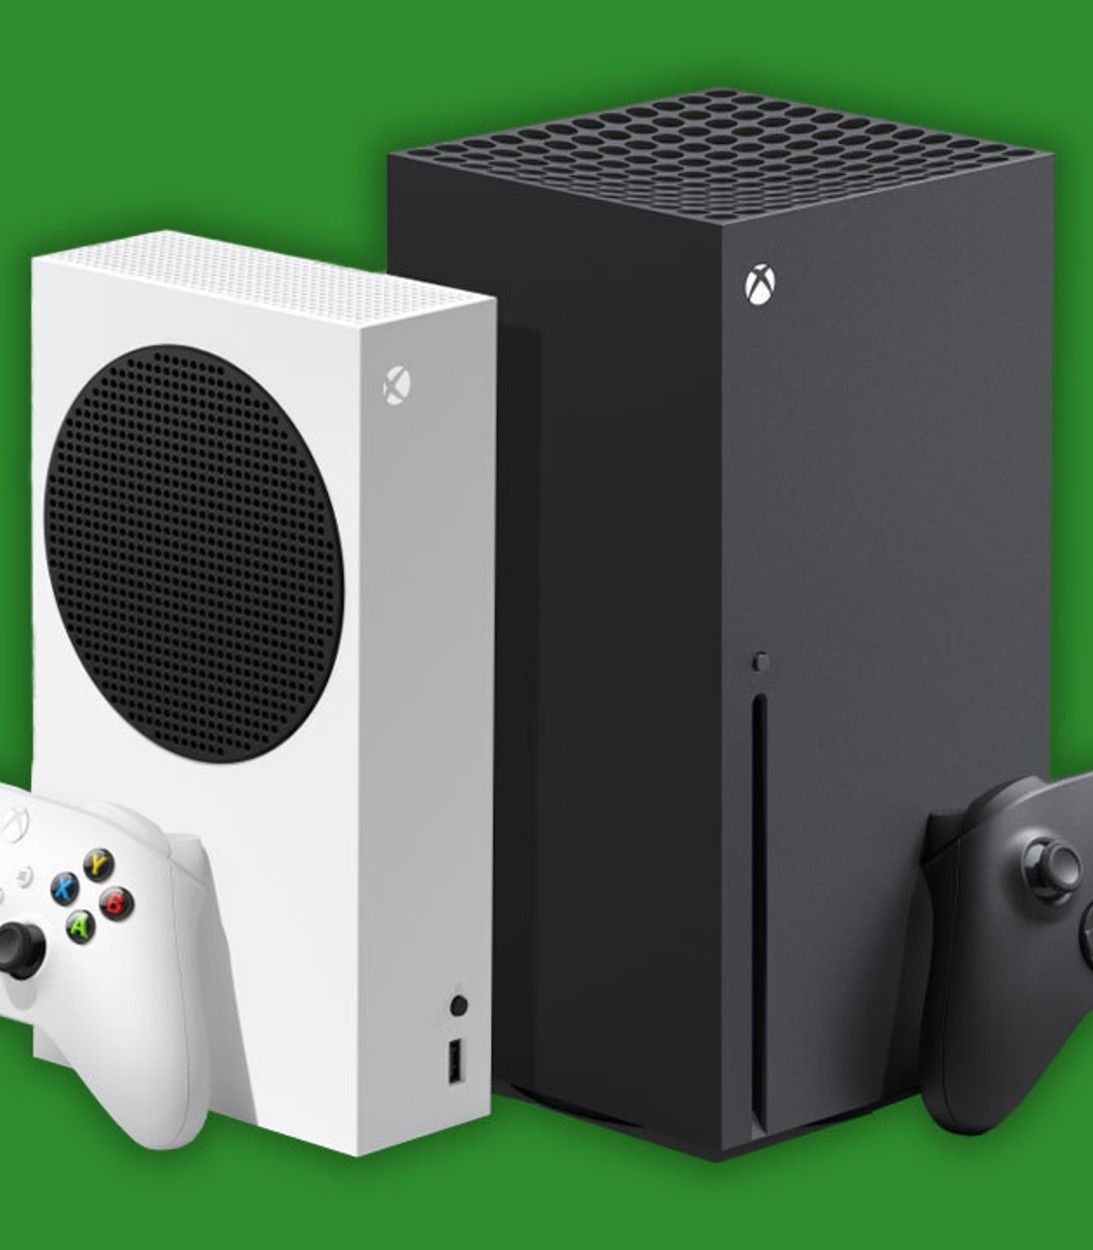 The xbox series s and series x consoles together